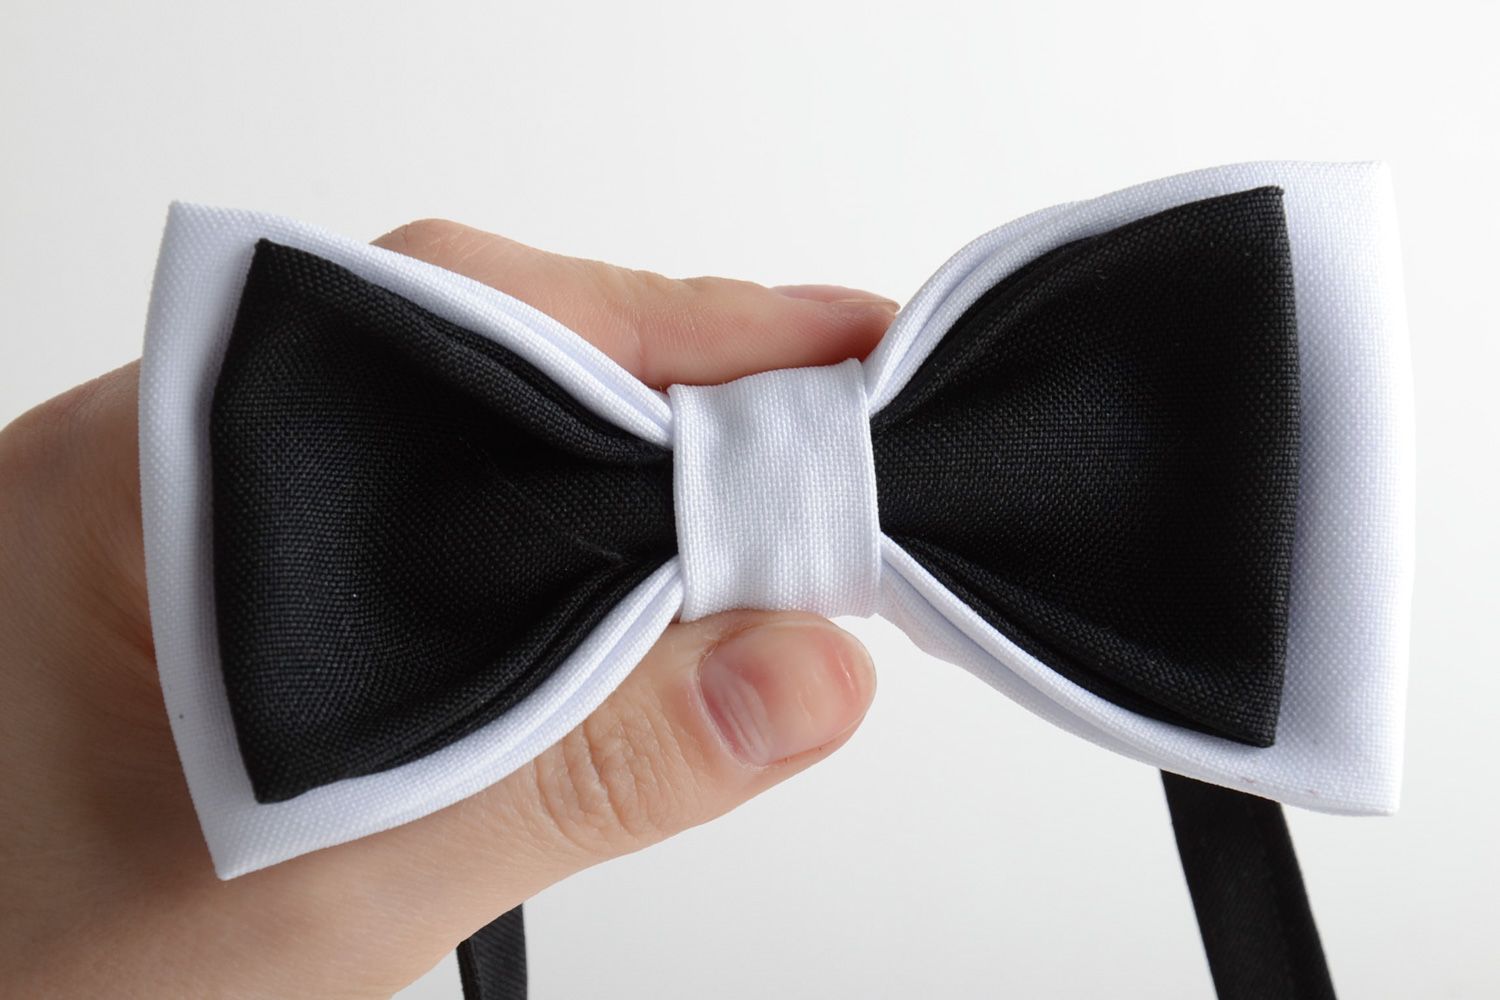 Handmade contrast black and white bow tie sewn of costume fabric for men photo 5